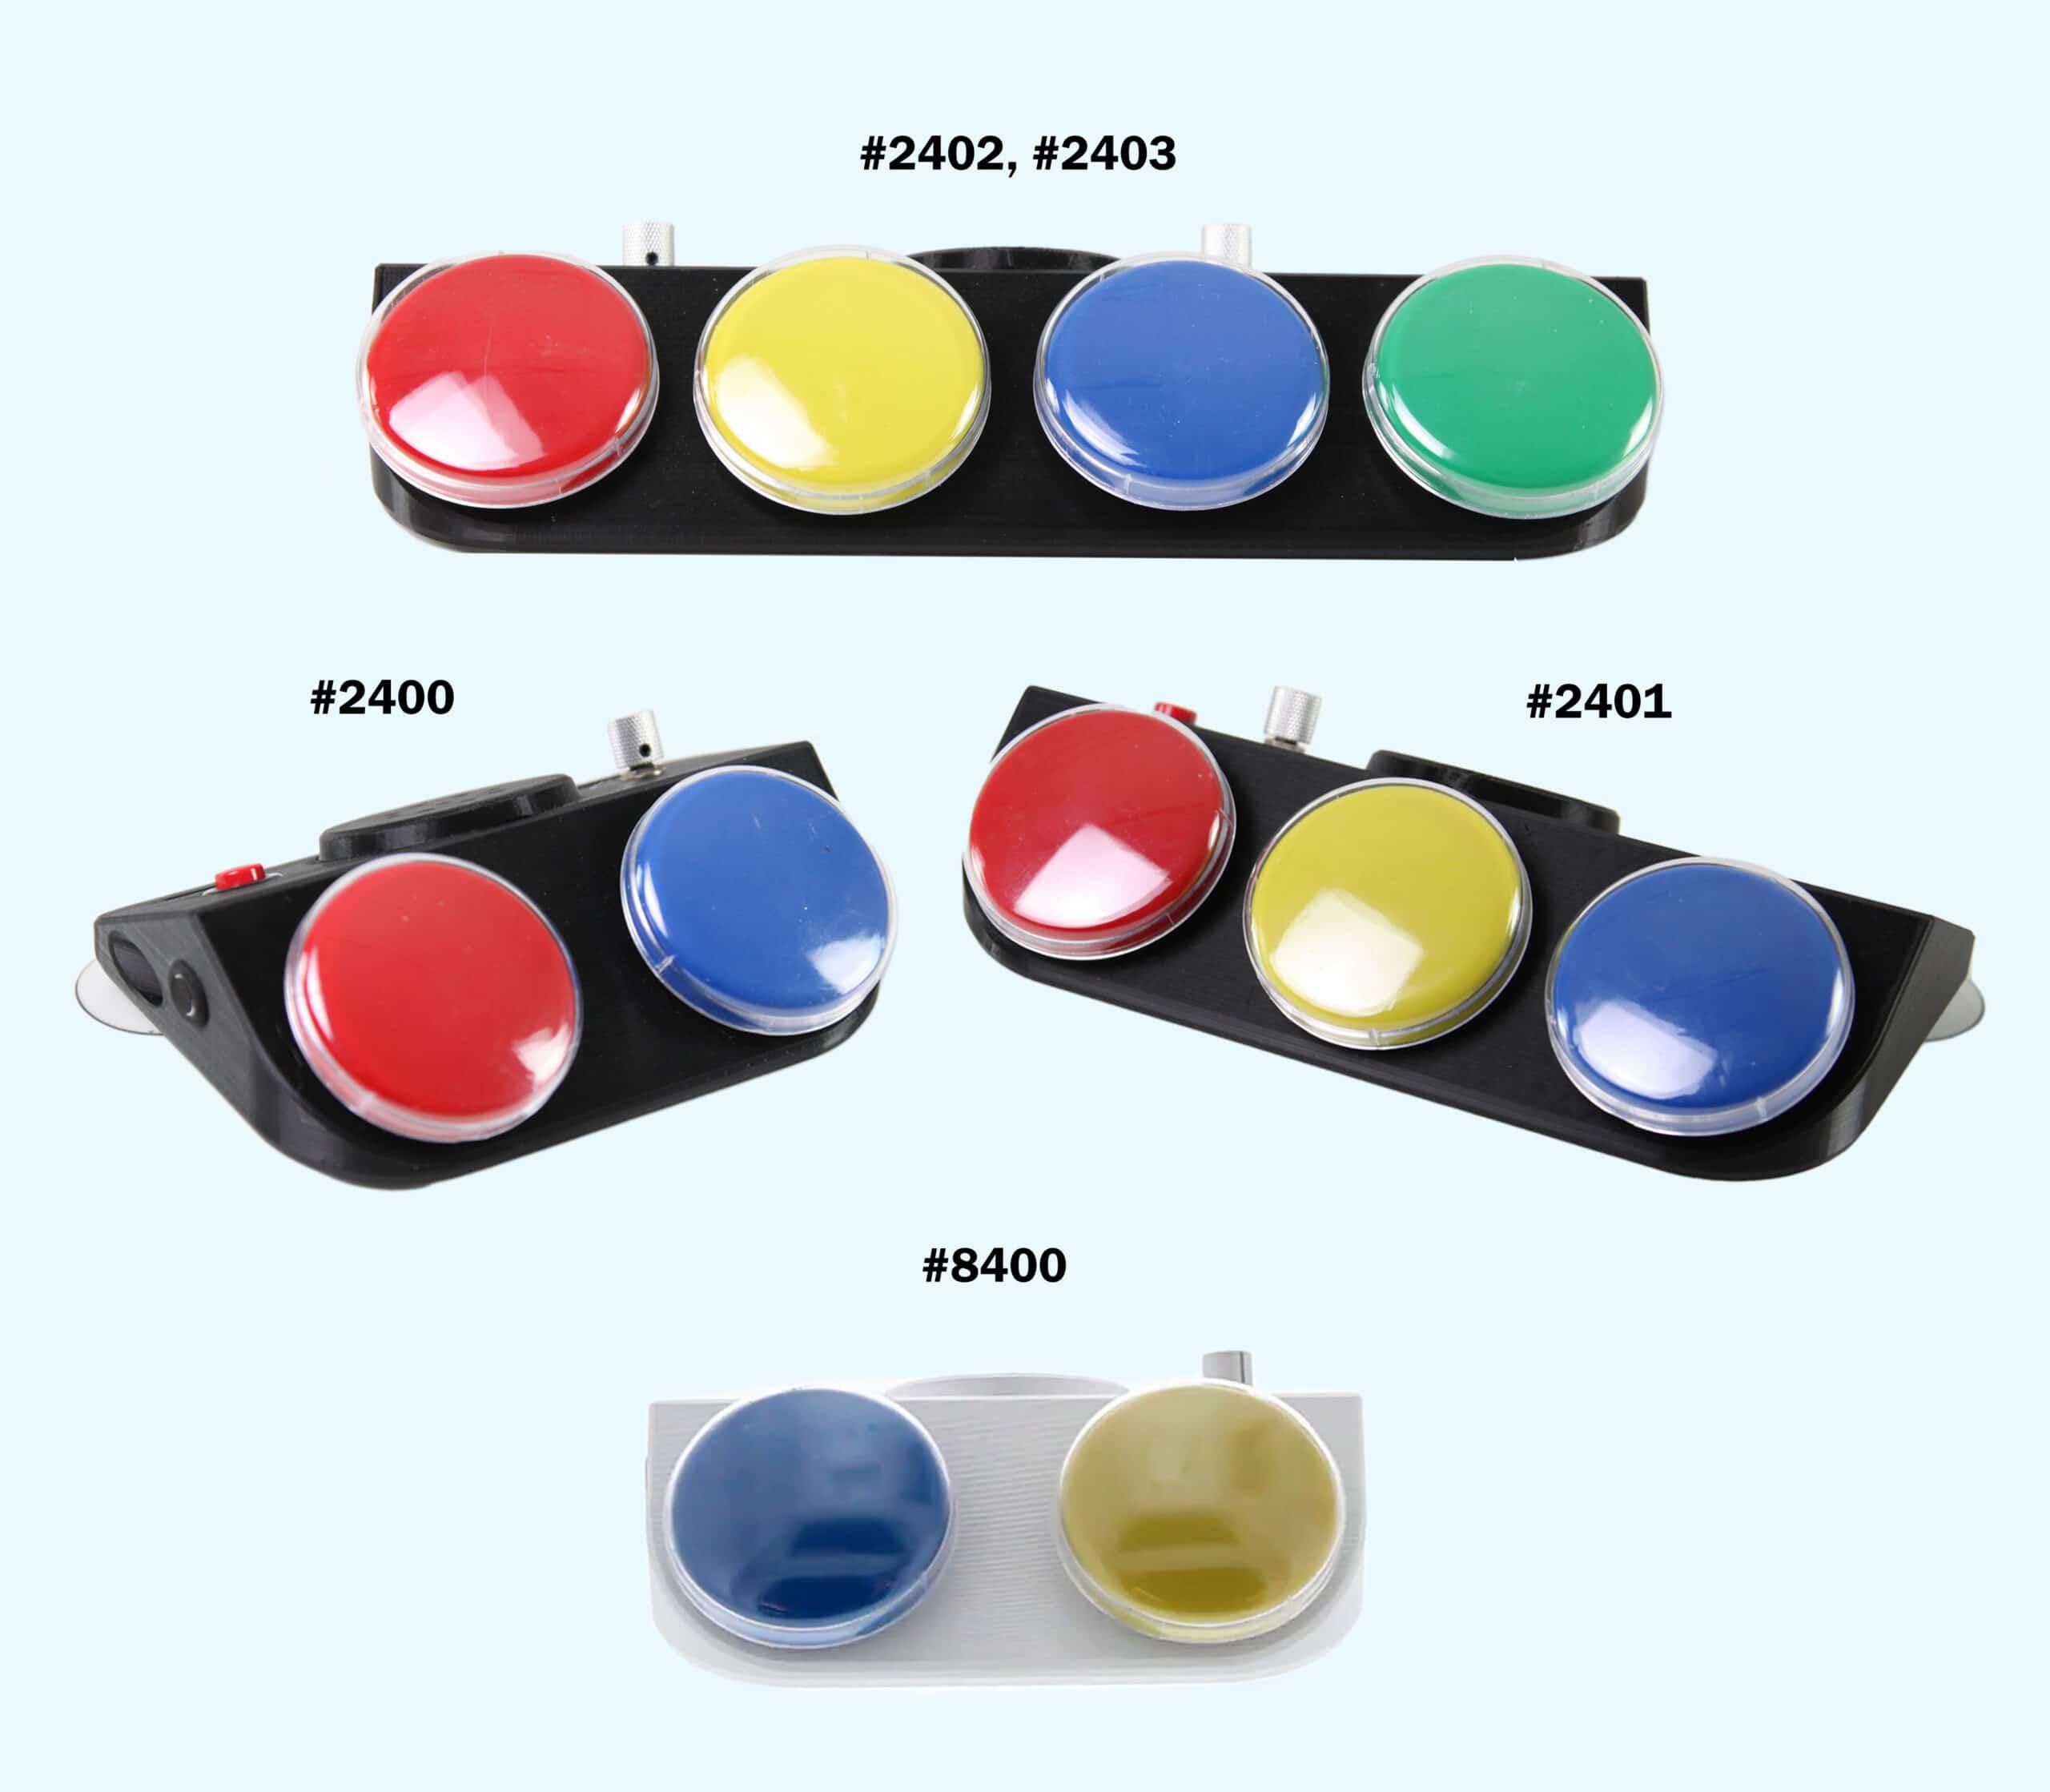 Multiple devices with colored buttons for talking.